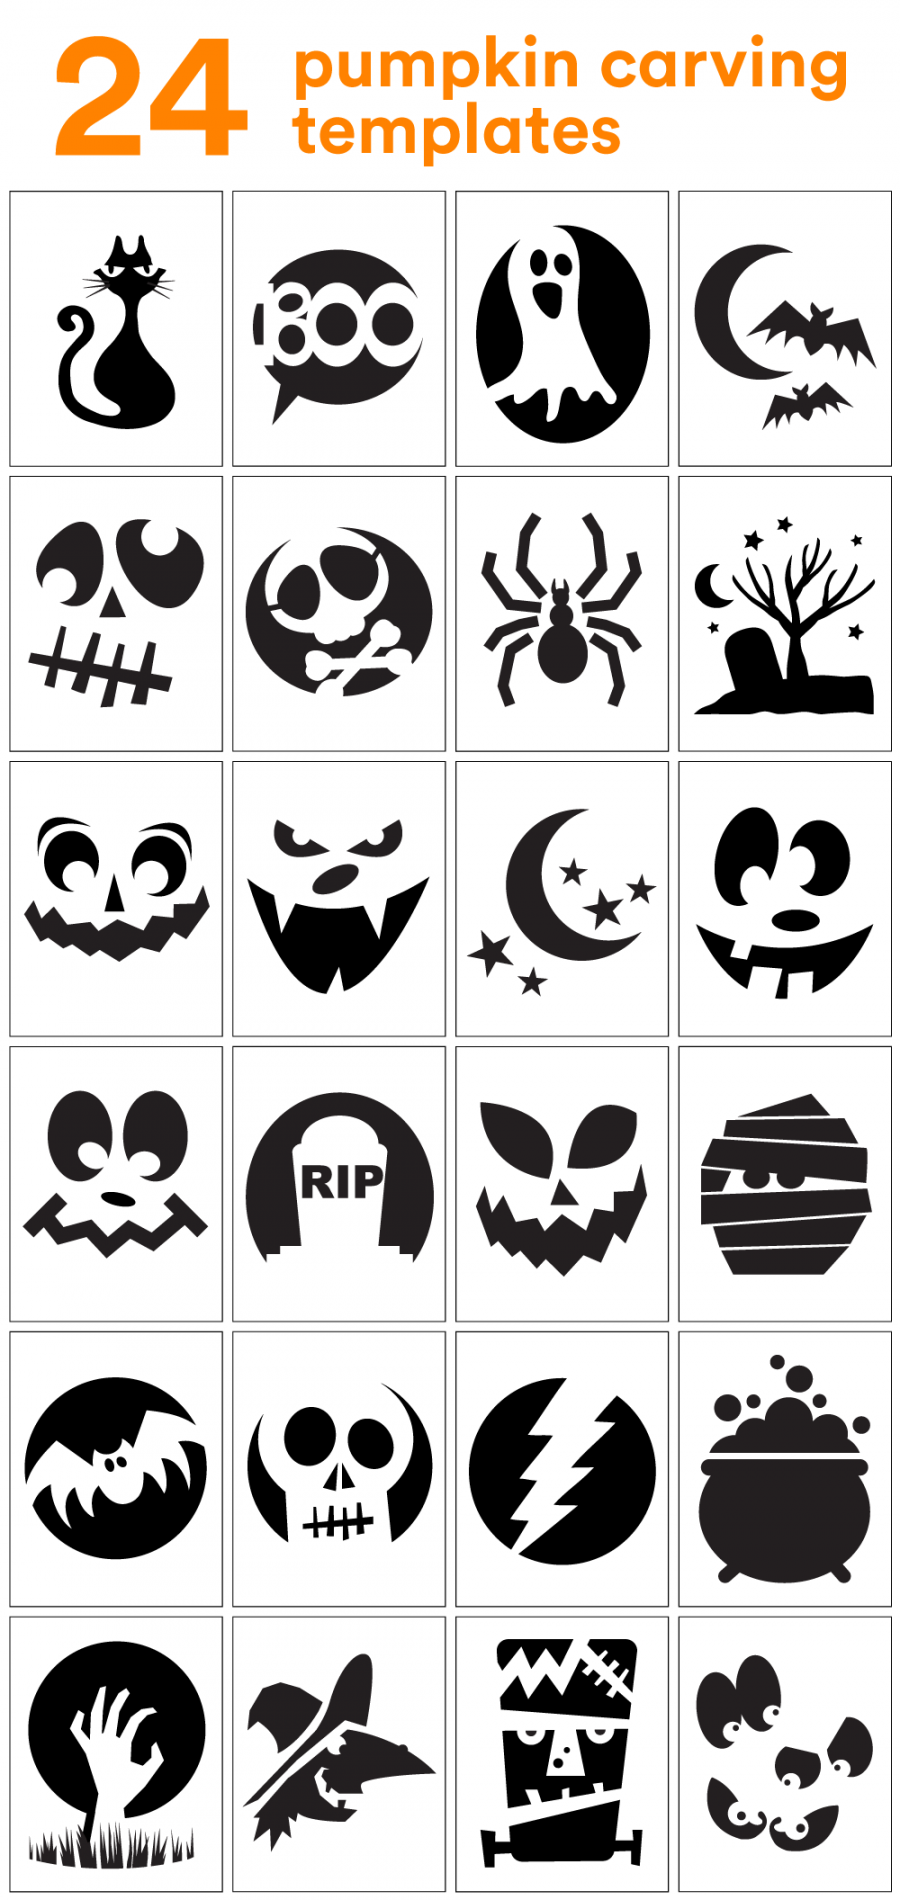 Download these free pumpkin carving stencils to print and apply to